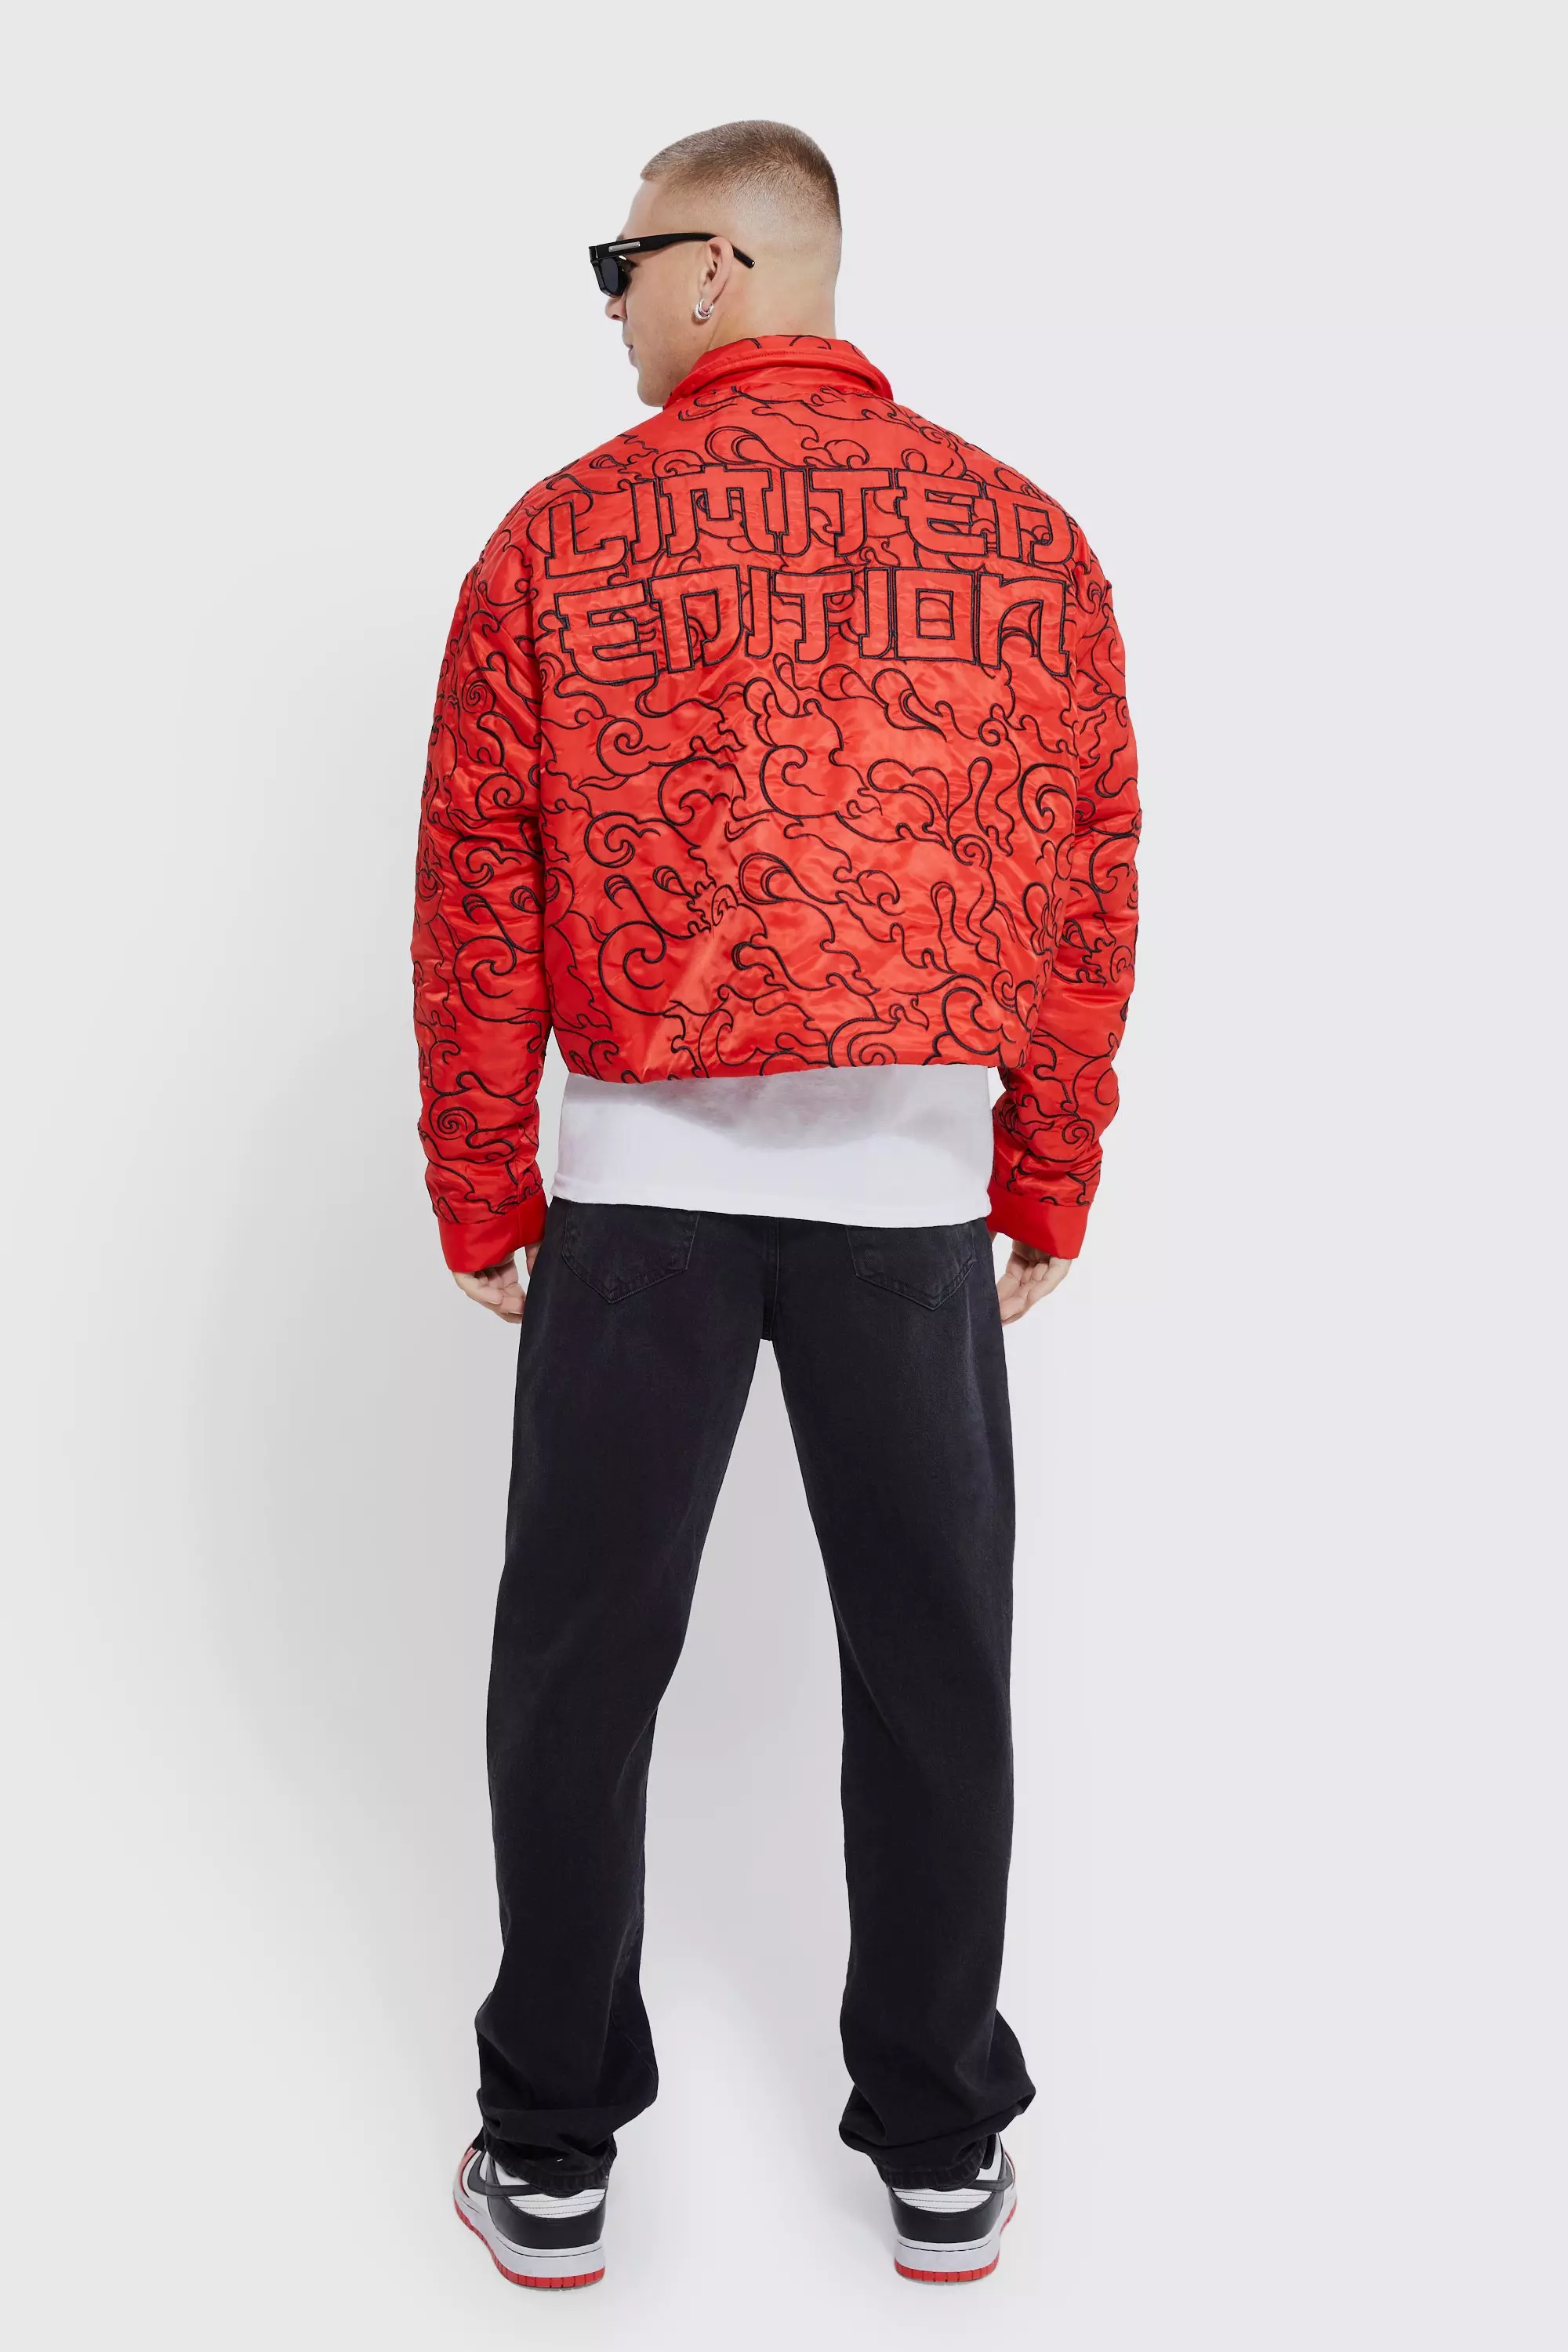 LOUIS VUITTON Embroidered Lightweight Bomber Men - clothing